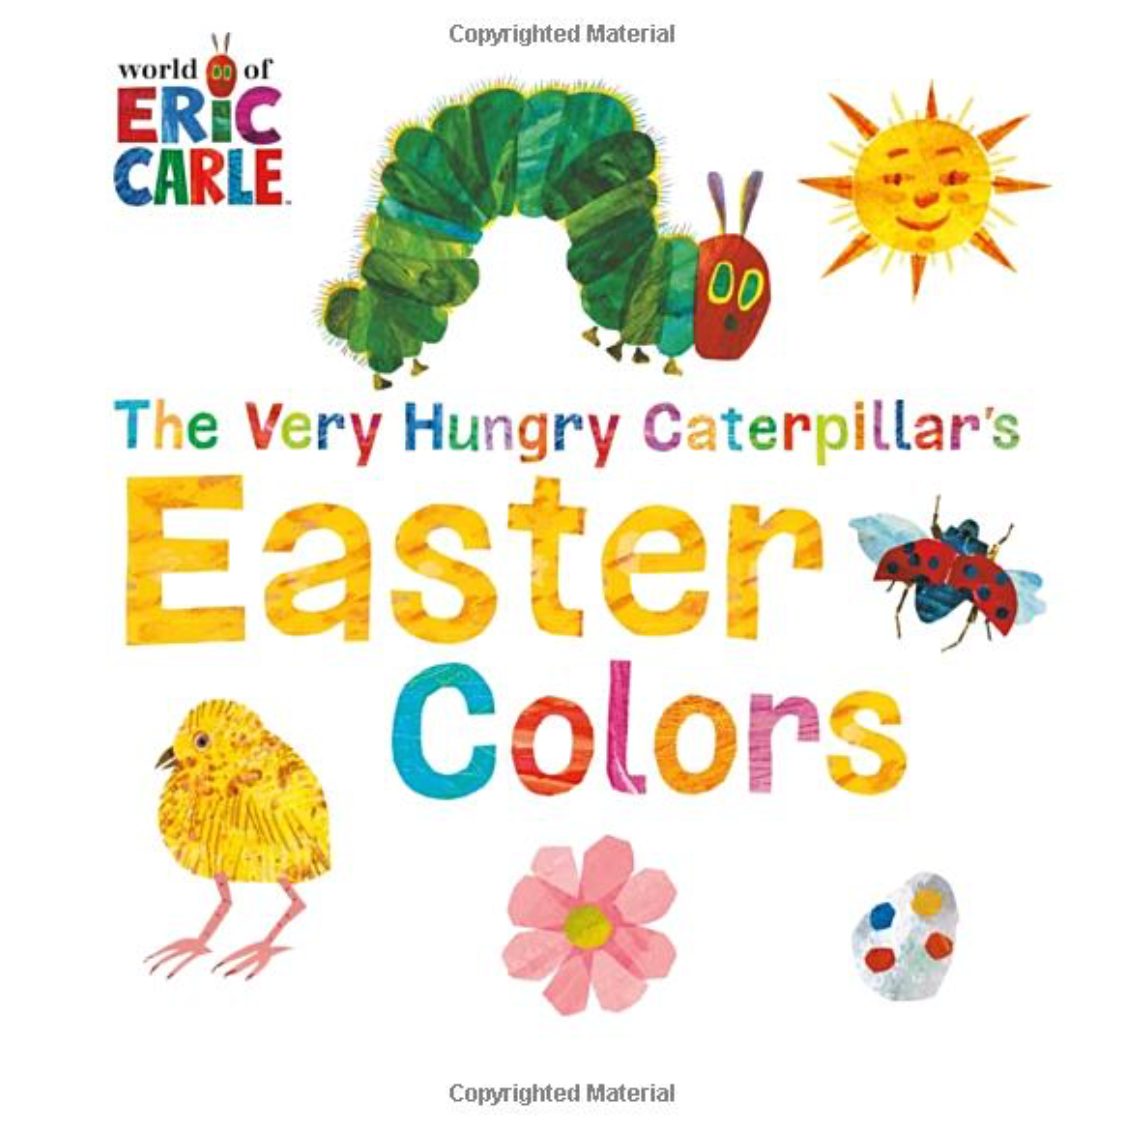 The Very Hungry Caterpillar Easter Colors